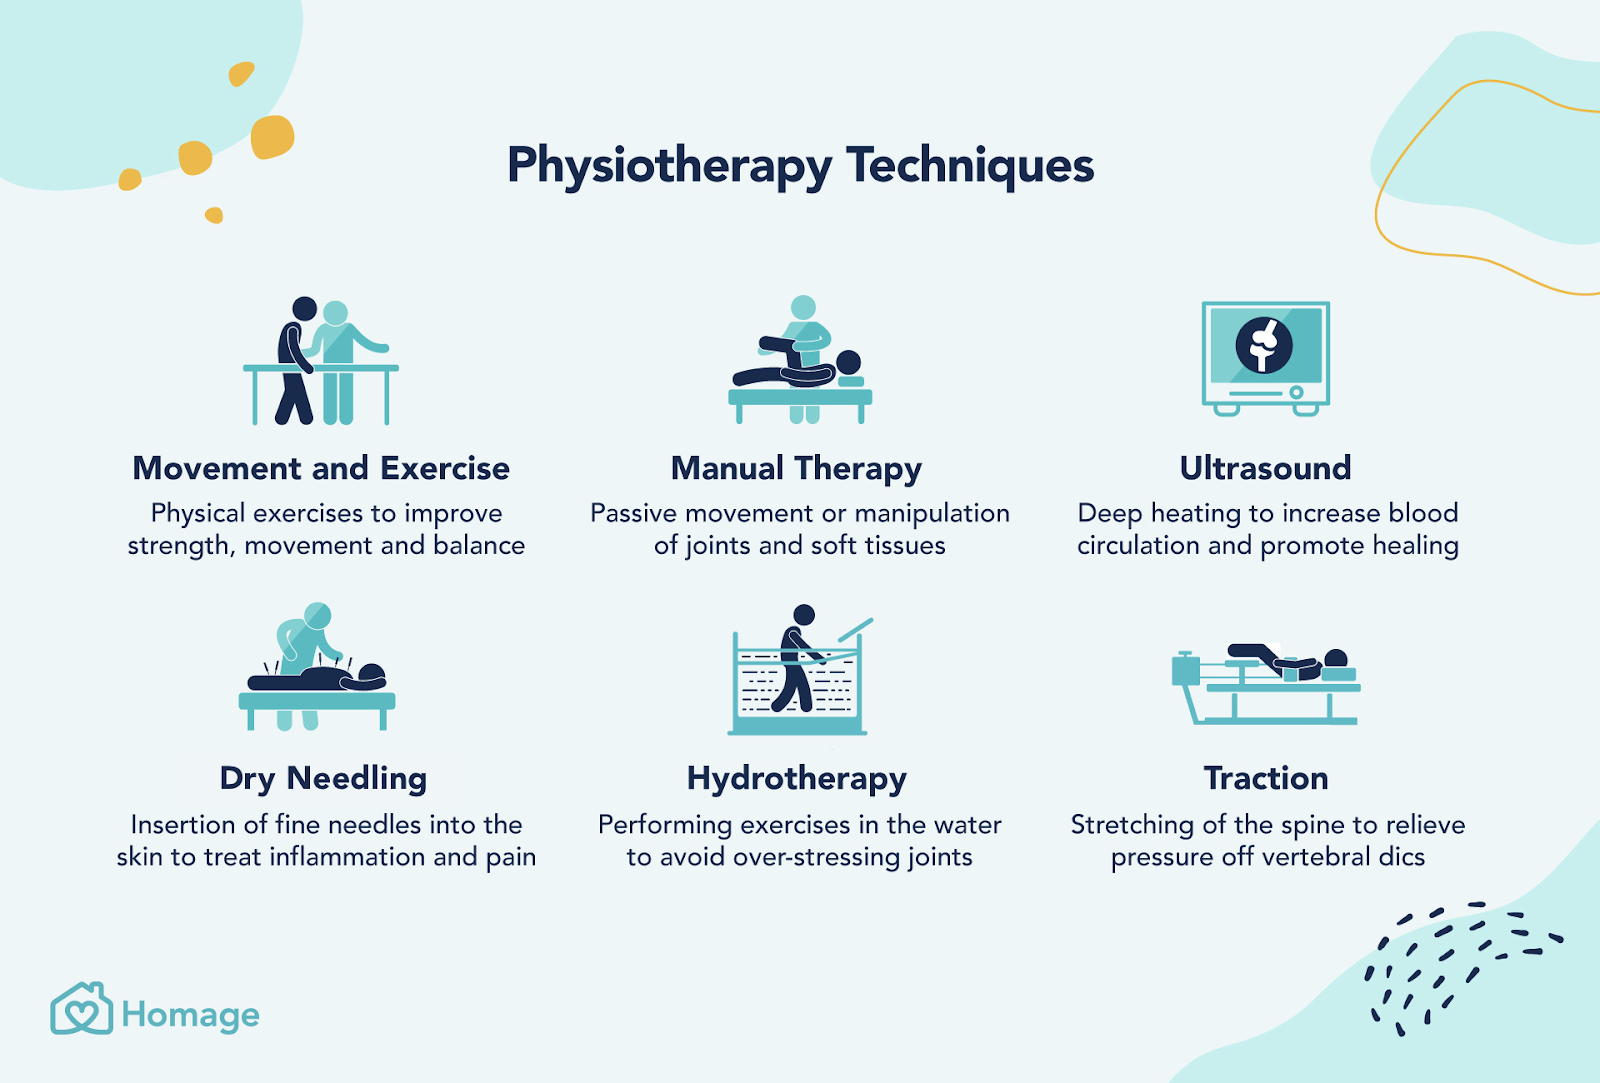 10 Ways that Physiotherapy can Improve your Lifestyle